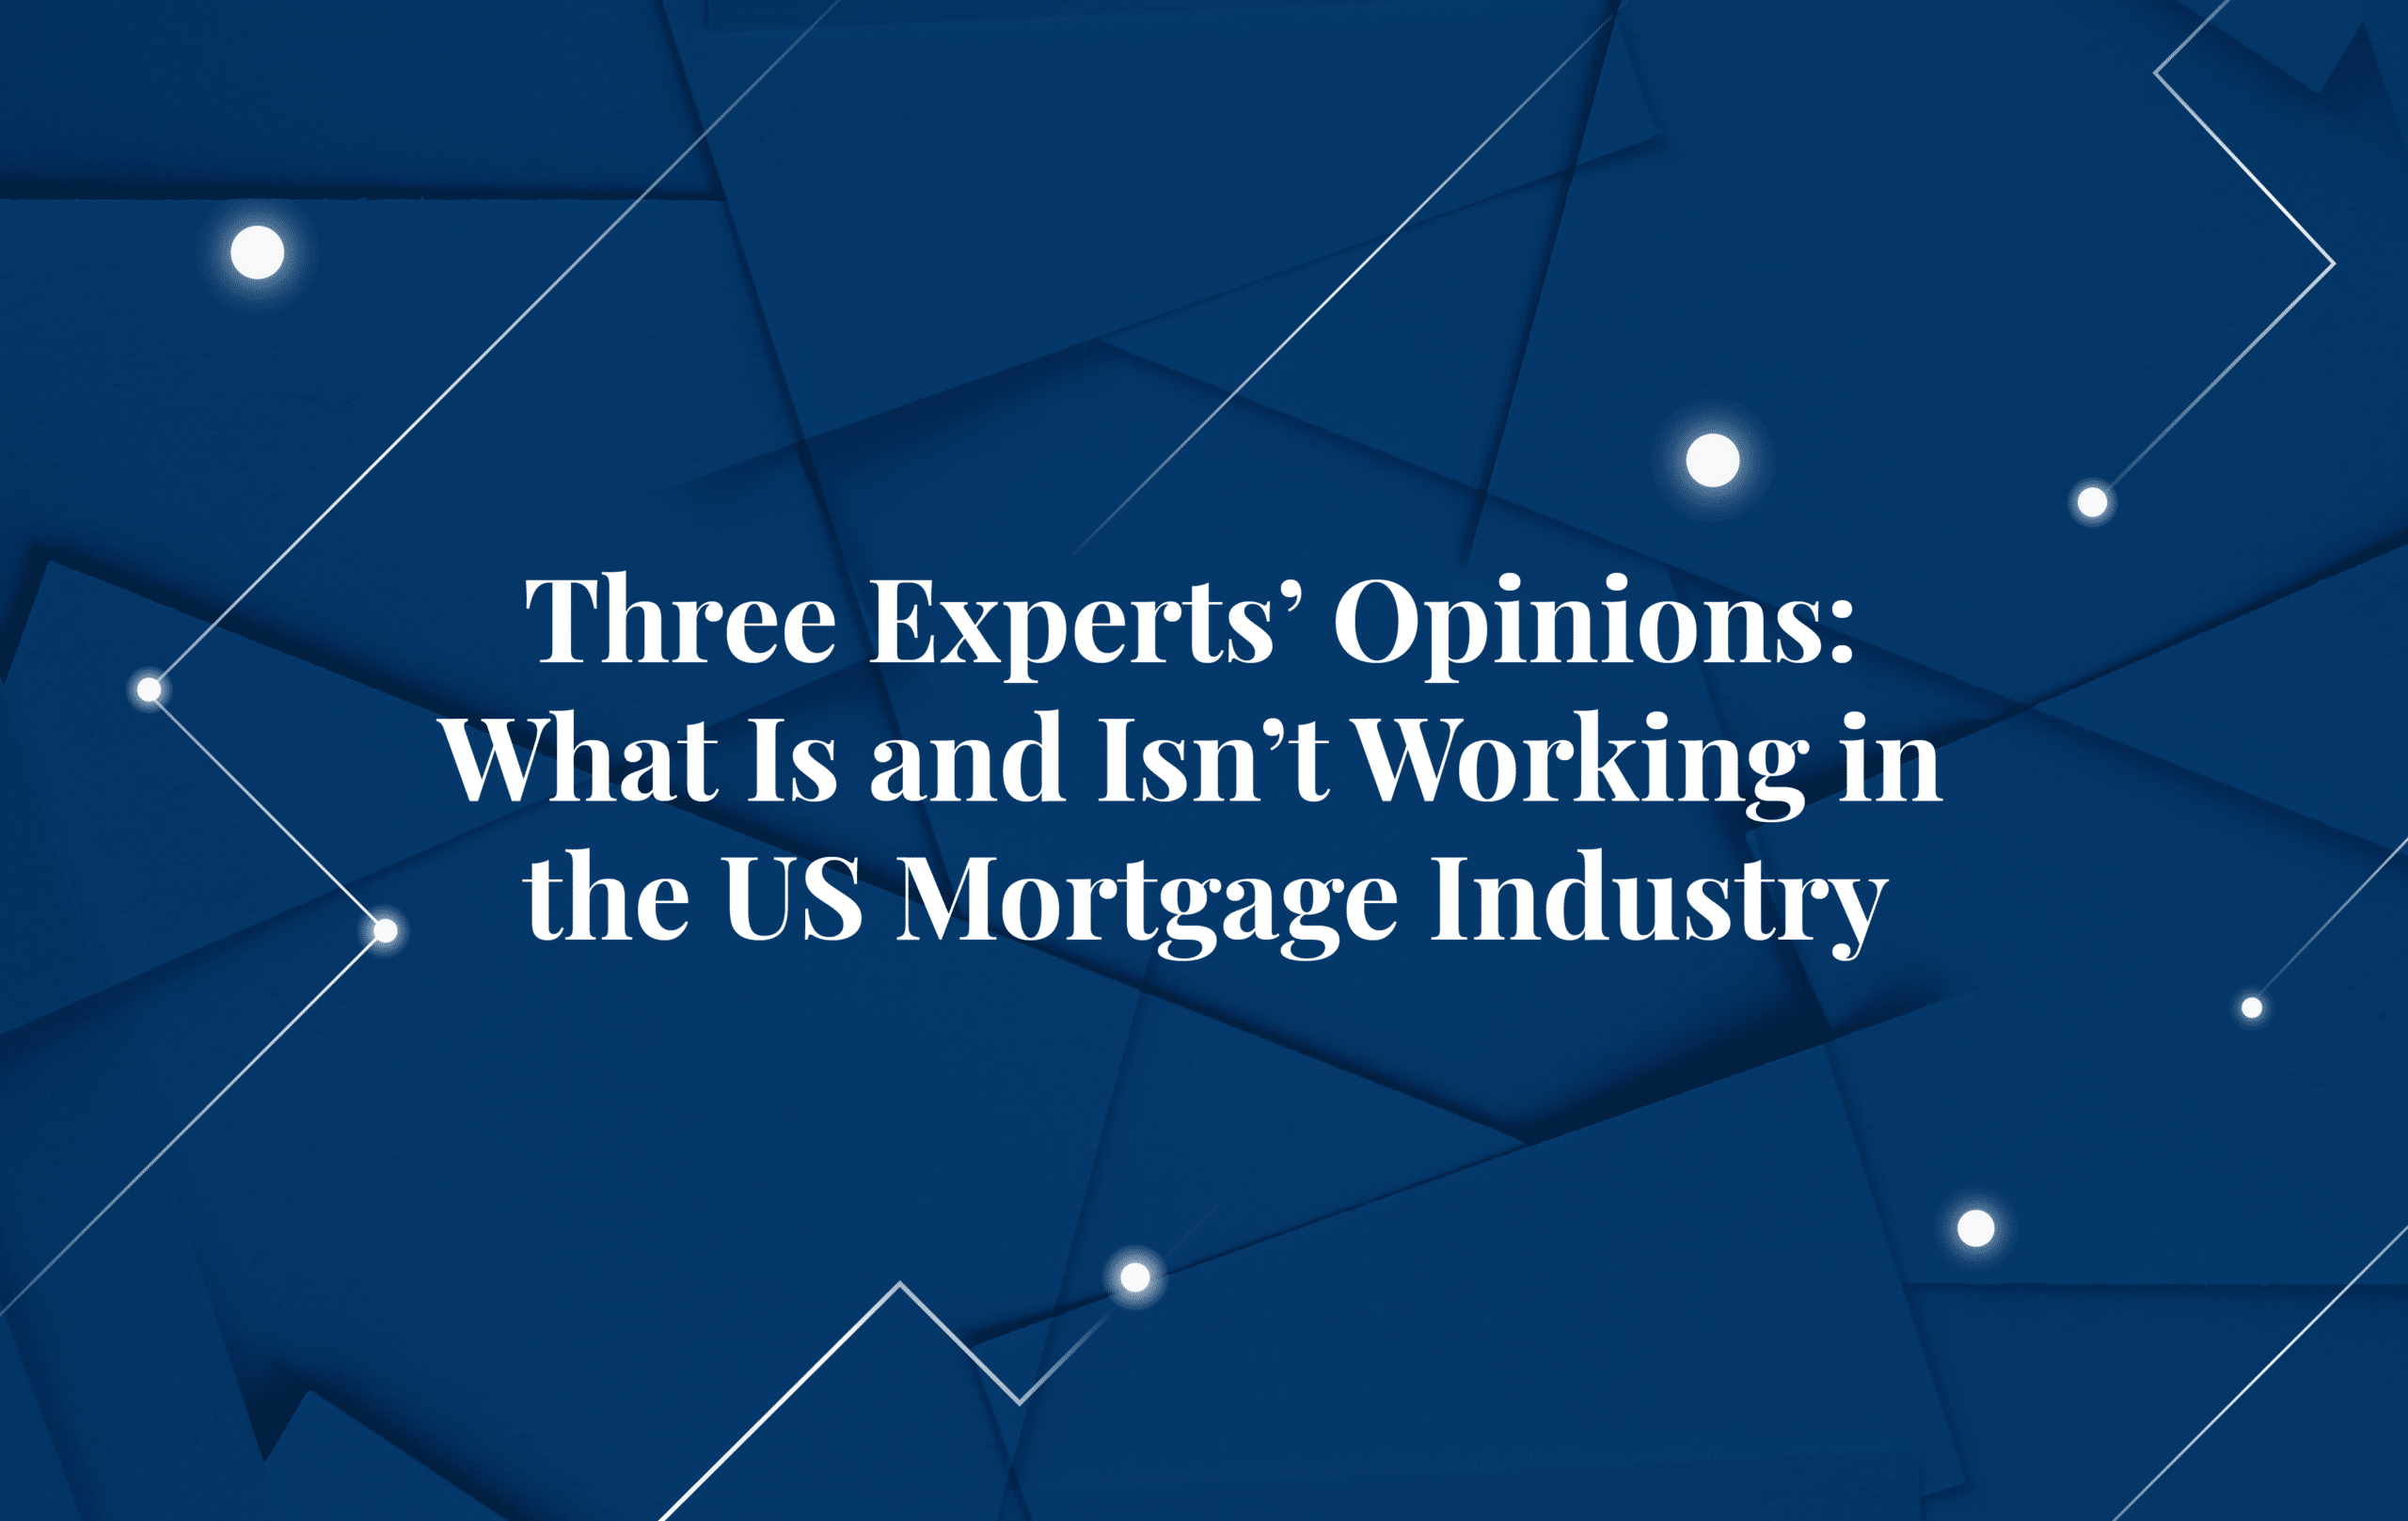 Three Experts’ Opinions: What Is and Isn’t Working in the US Mortgage Industry